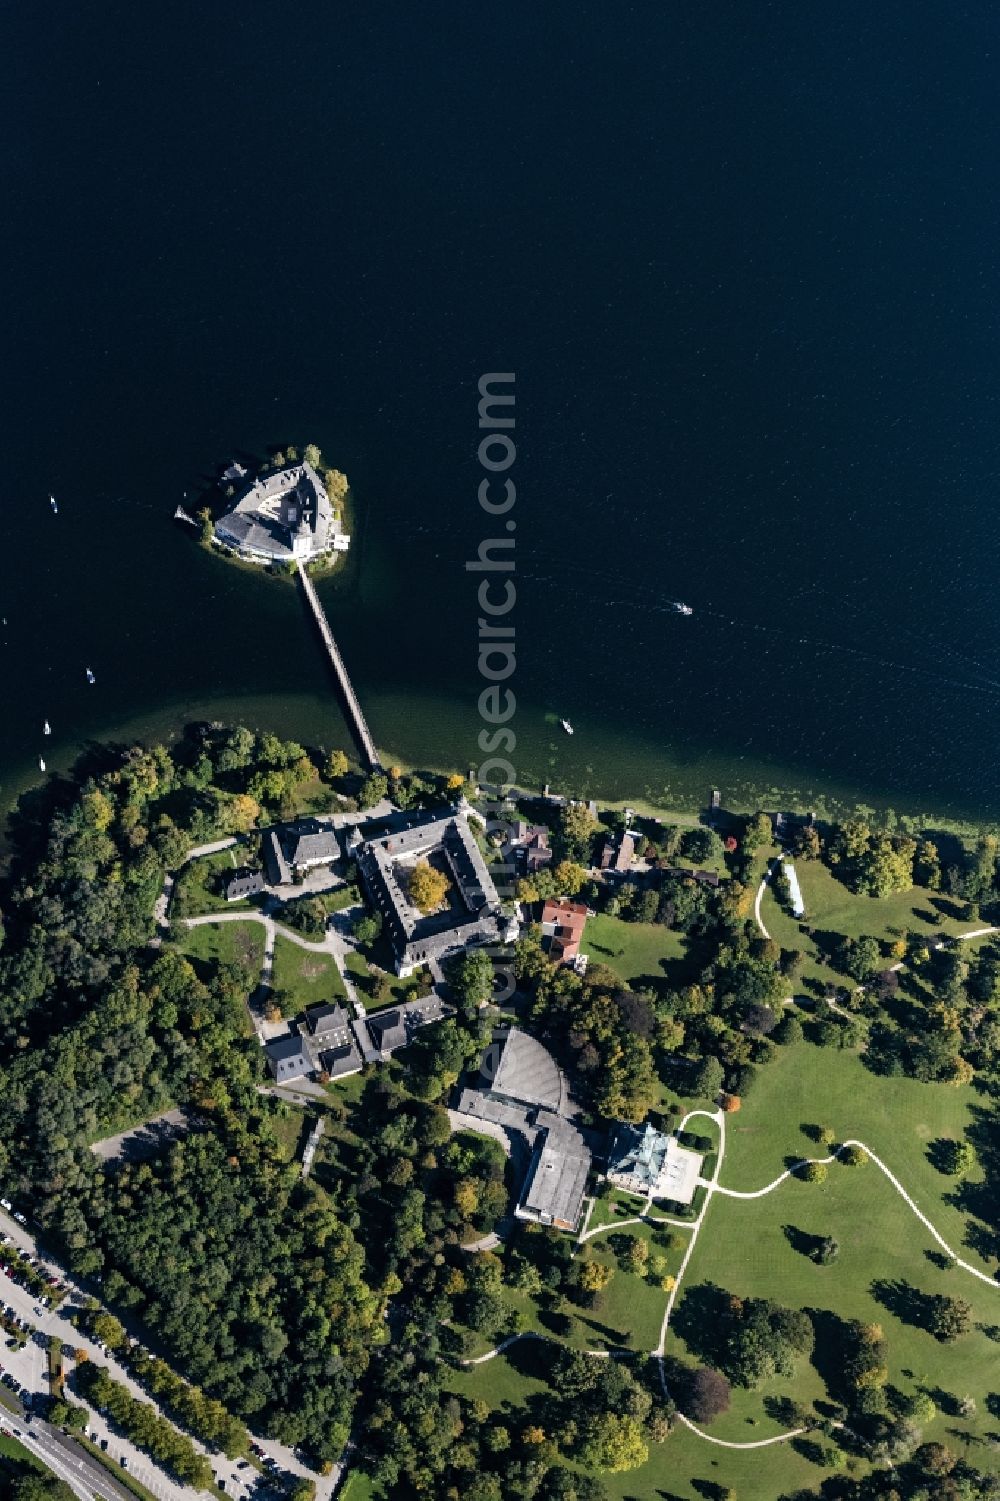 Aerial image Gmunden - Building and castle park systems of water castle Seeschloss Orth on lake Traunsee in Gmunden in Oberoesterreich, Austria